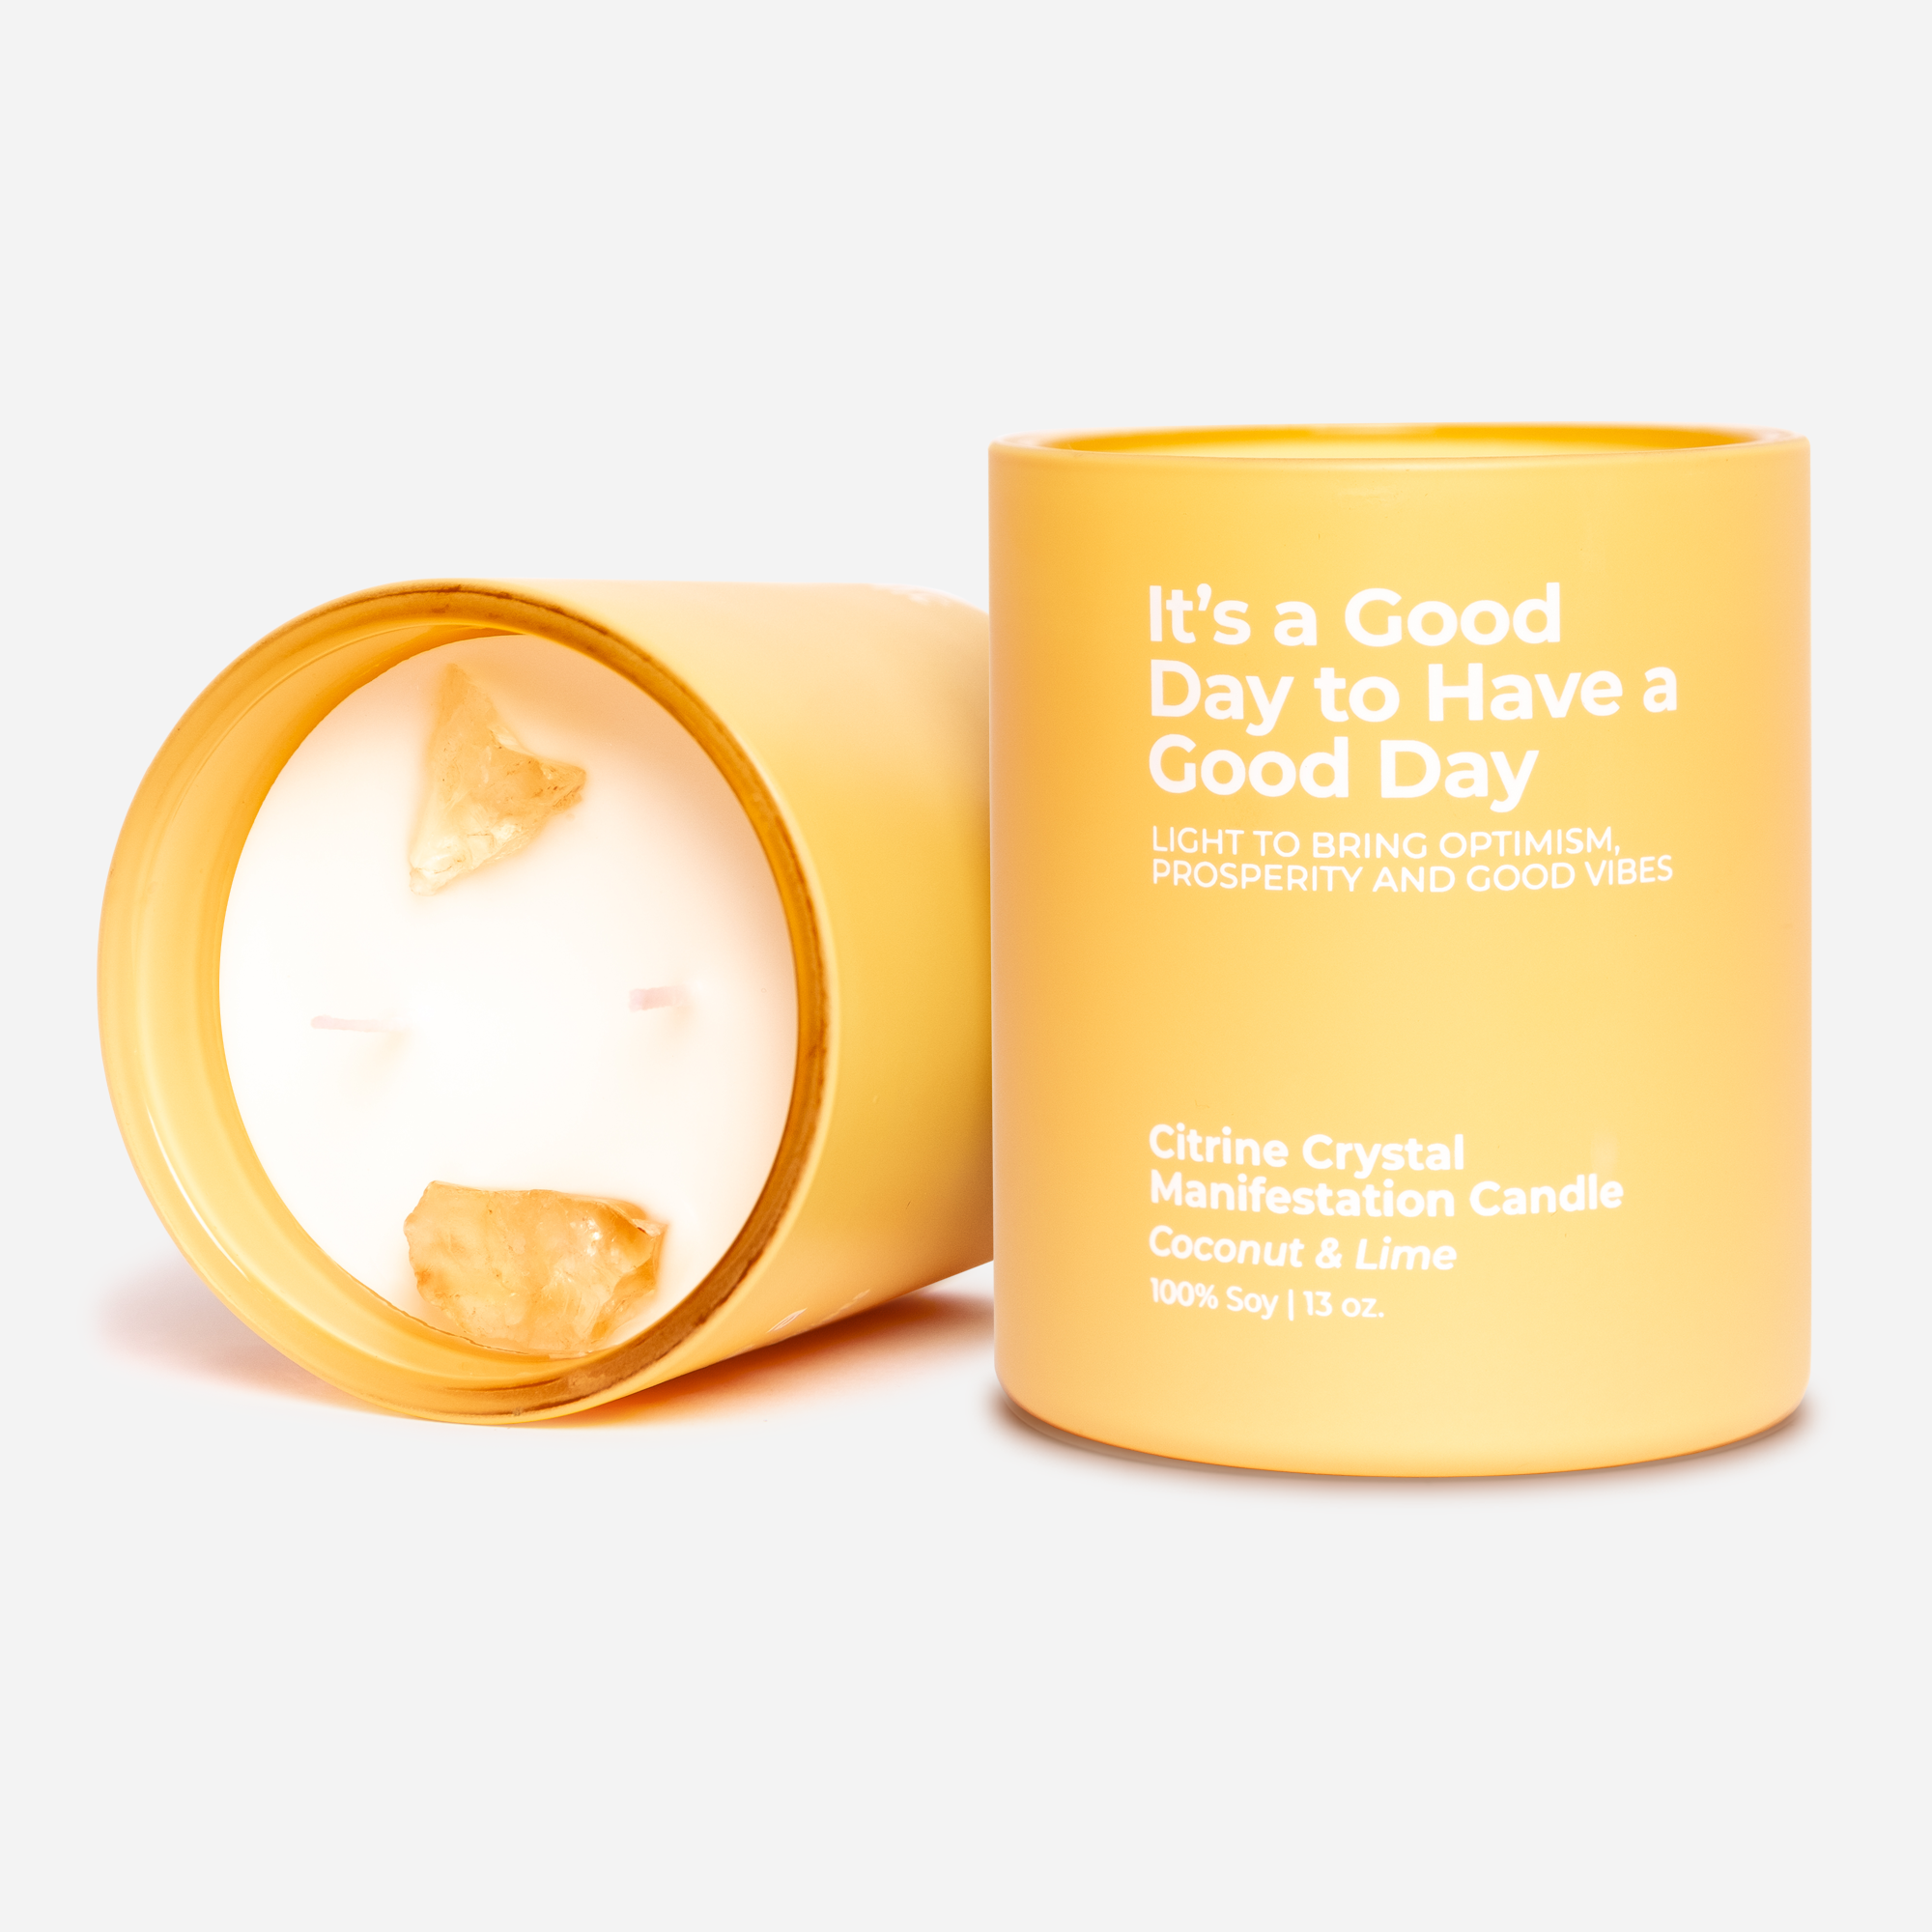 It's A Good Day to have a Good Day - Citrine Crystal Manifestation Candle